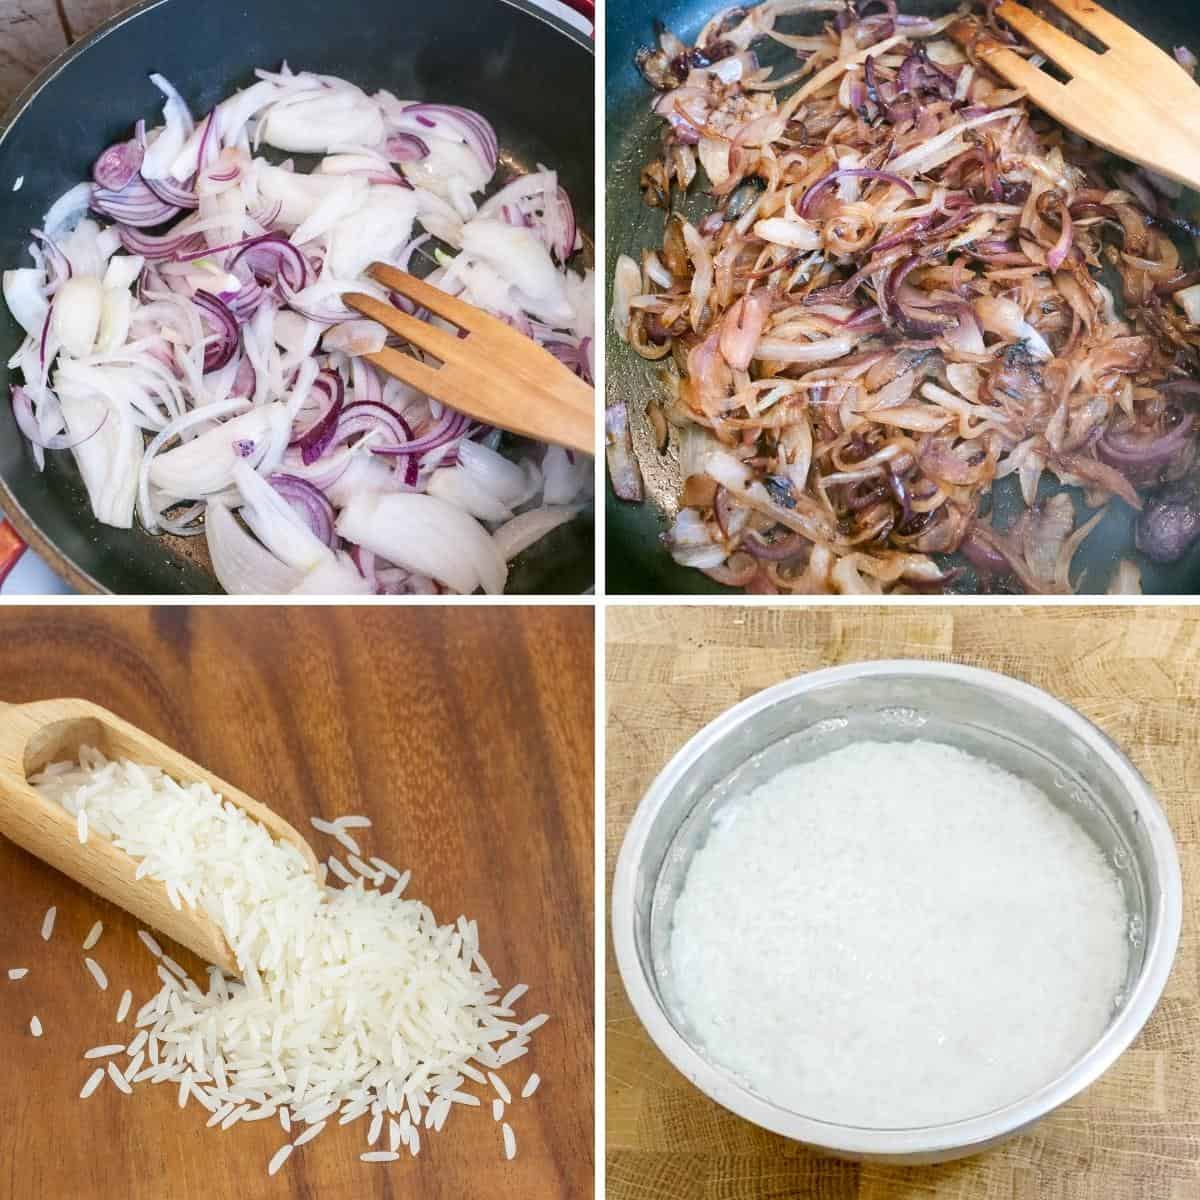 Progress pictures caramelize onions and soak rice for biryani.